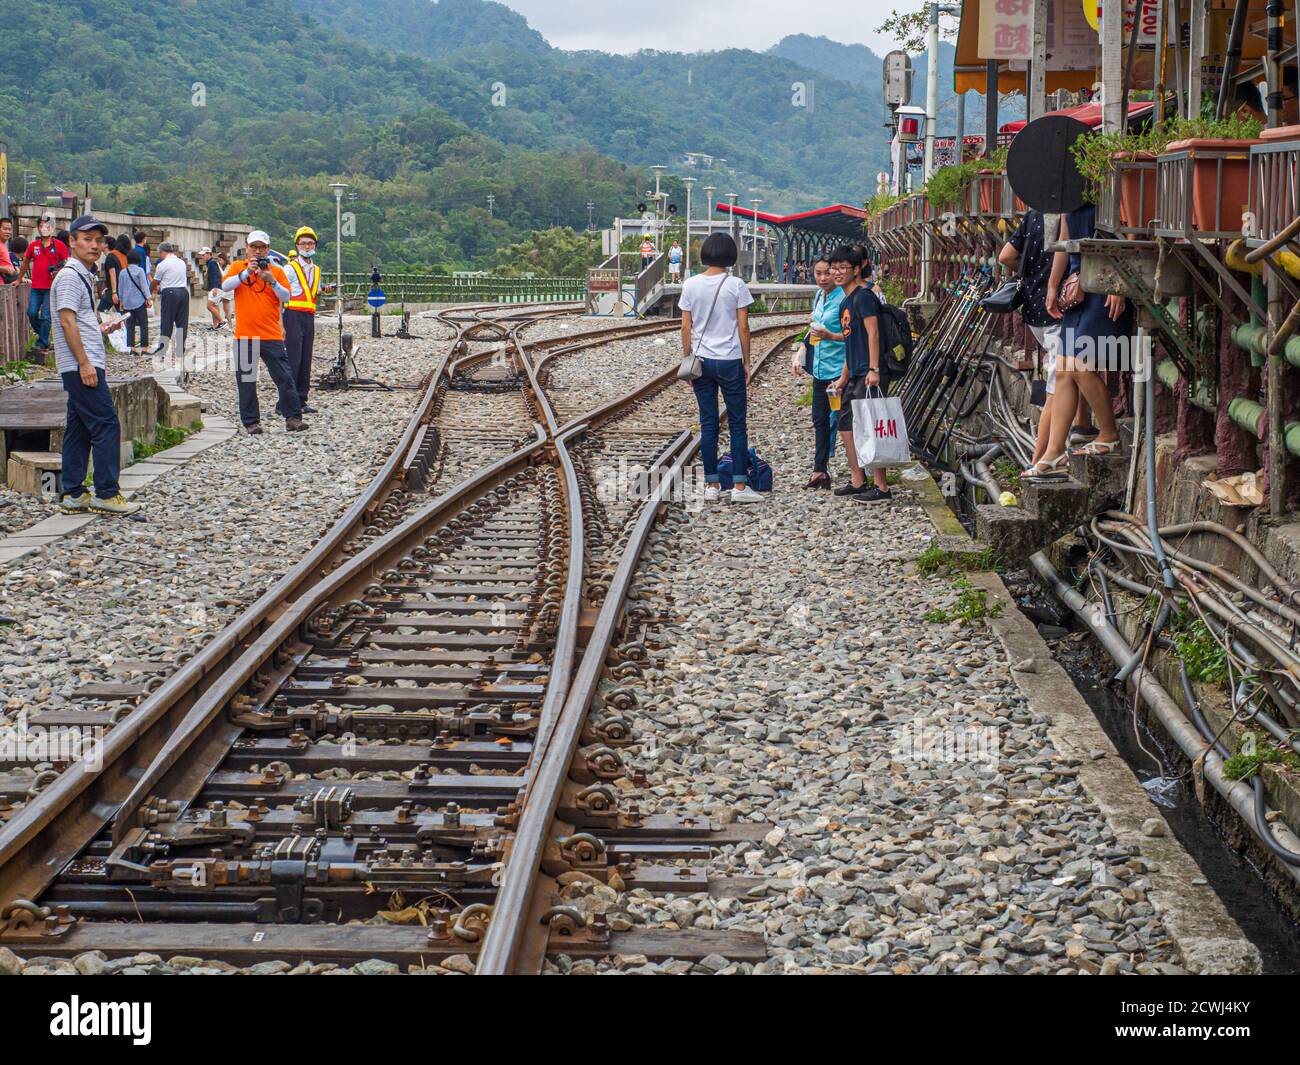 Shifen, Taiwan - October 05, 2016: Many people  on the railroad tracks  very close to buildings. Asia Stock Photo